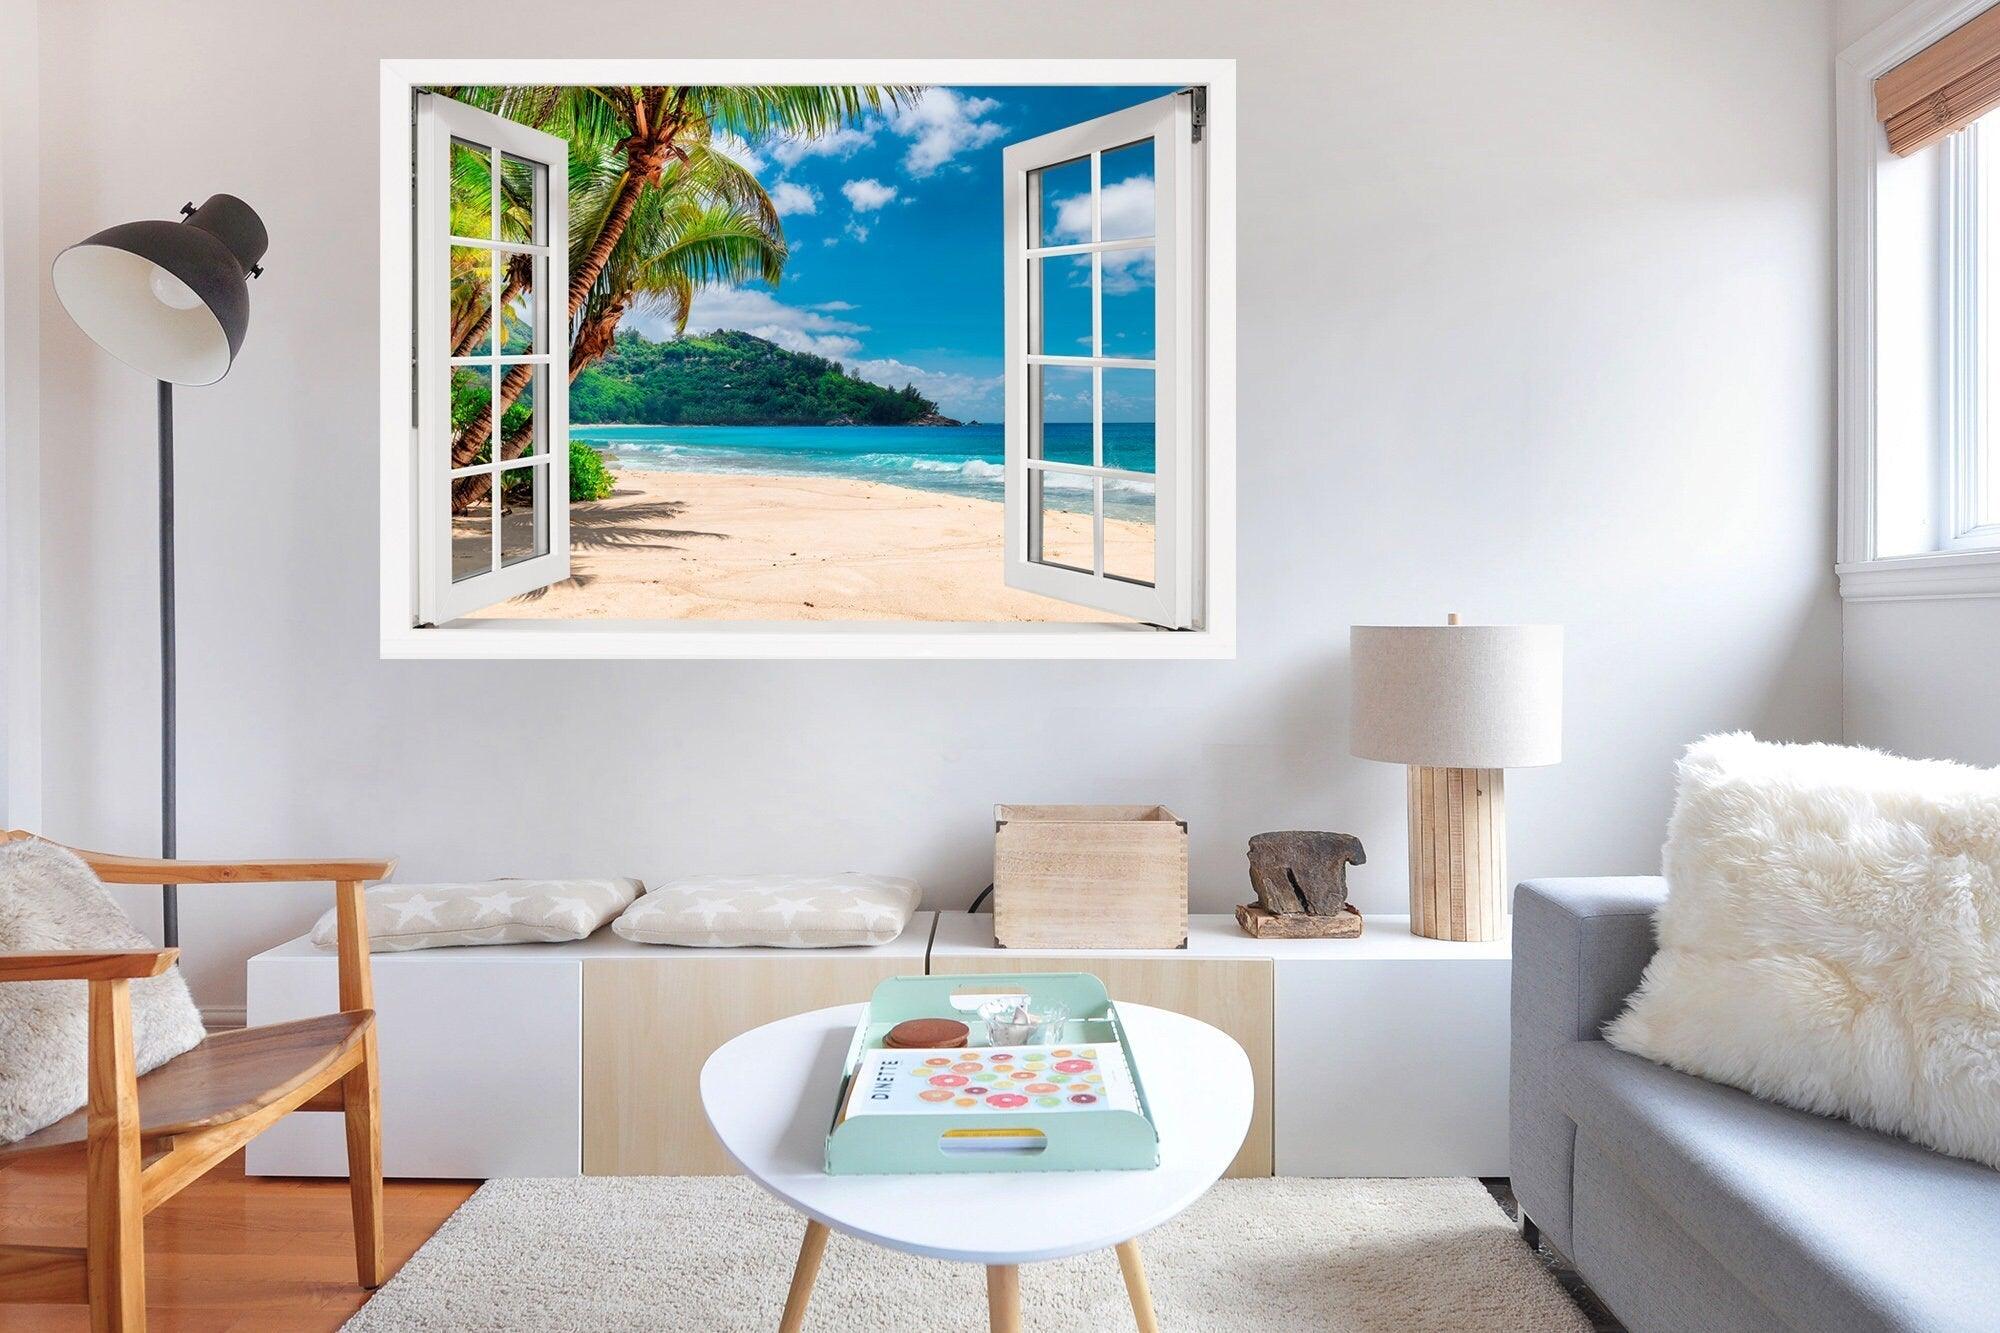 Window Scape Beach Bluewater and sand #16 Window Decal Sticker Sunset Lake Removable Fabric Window Frame Office Bedroom 3D